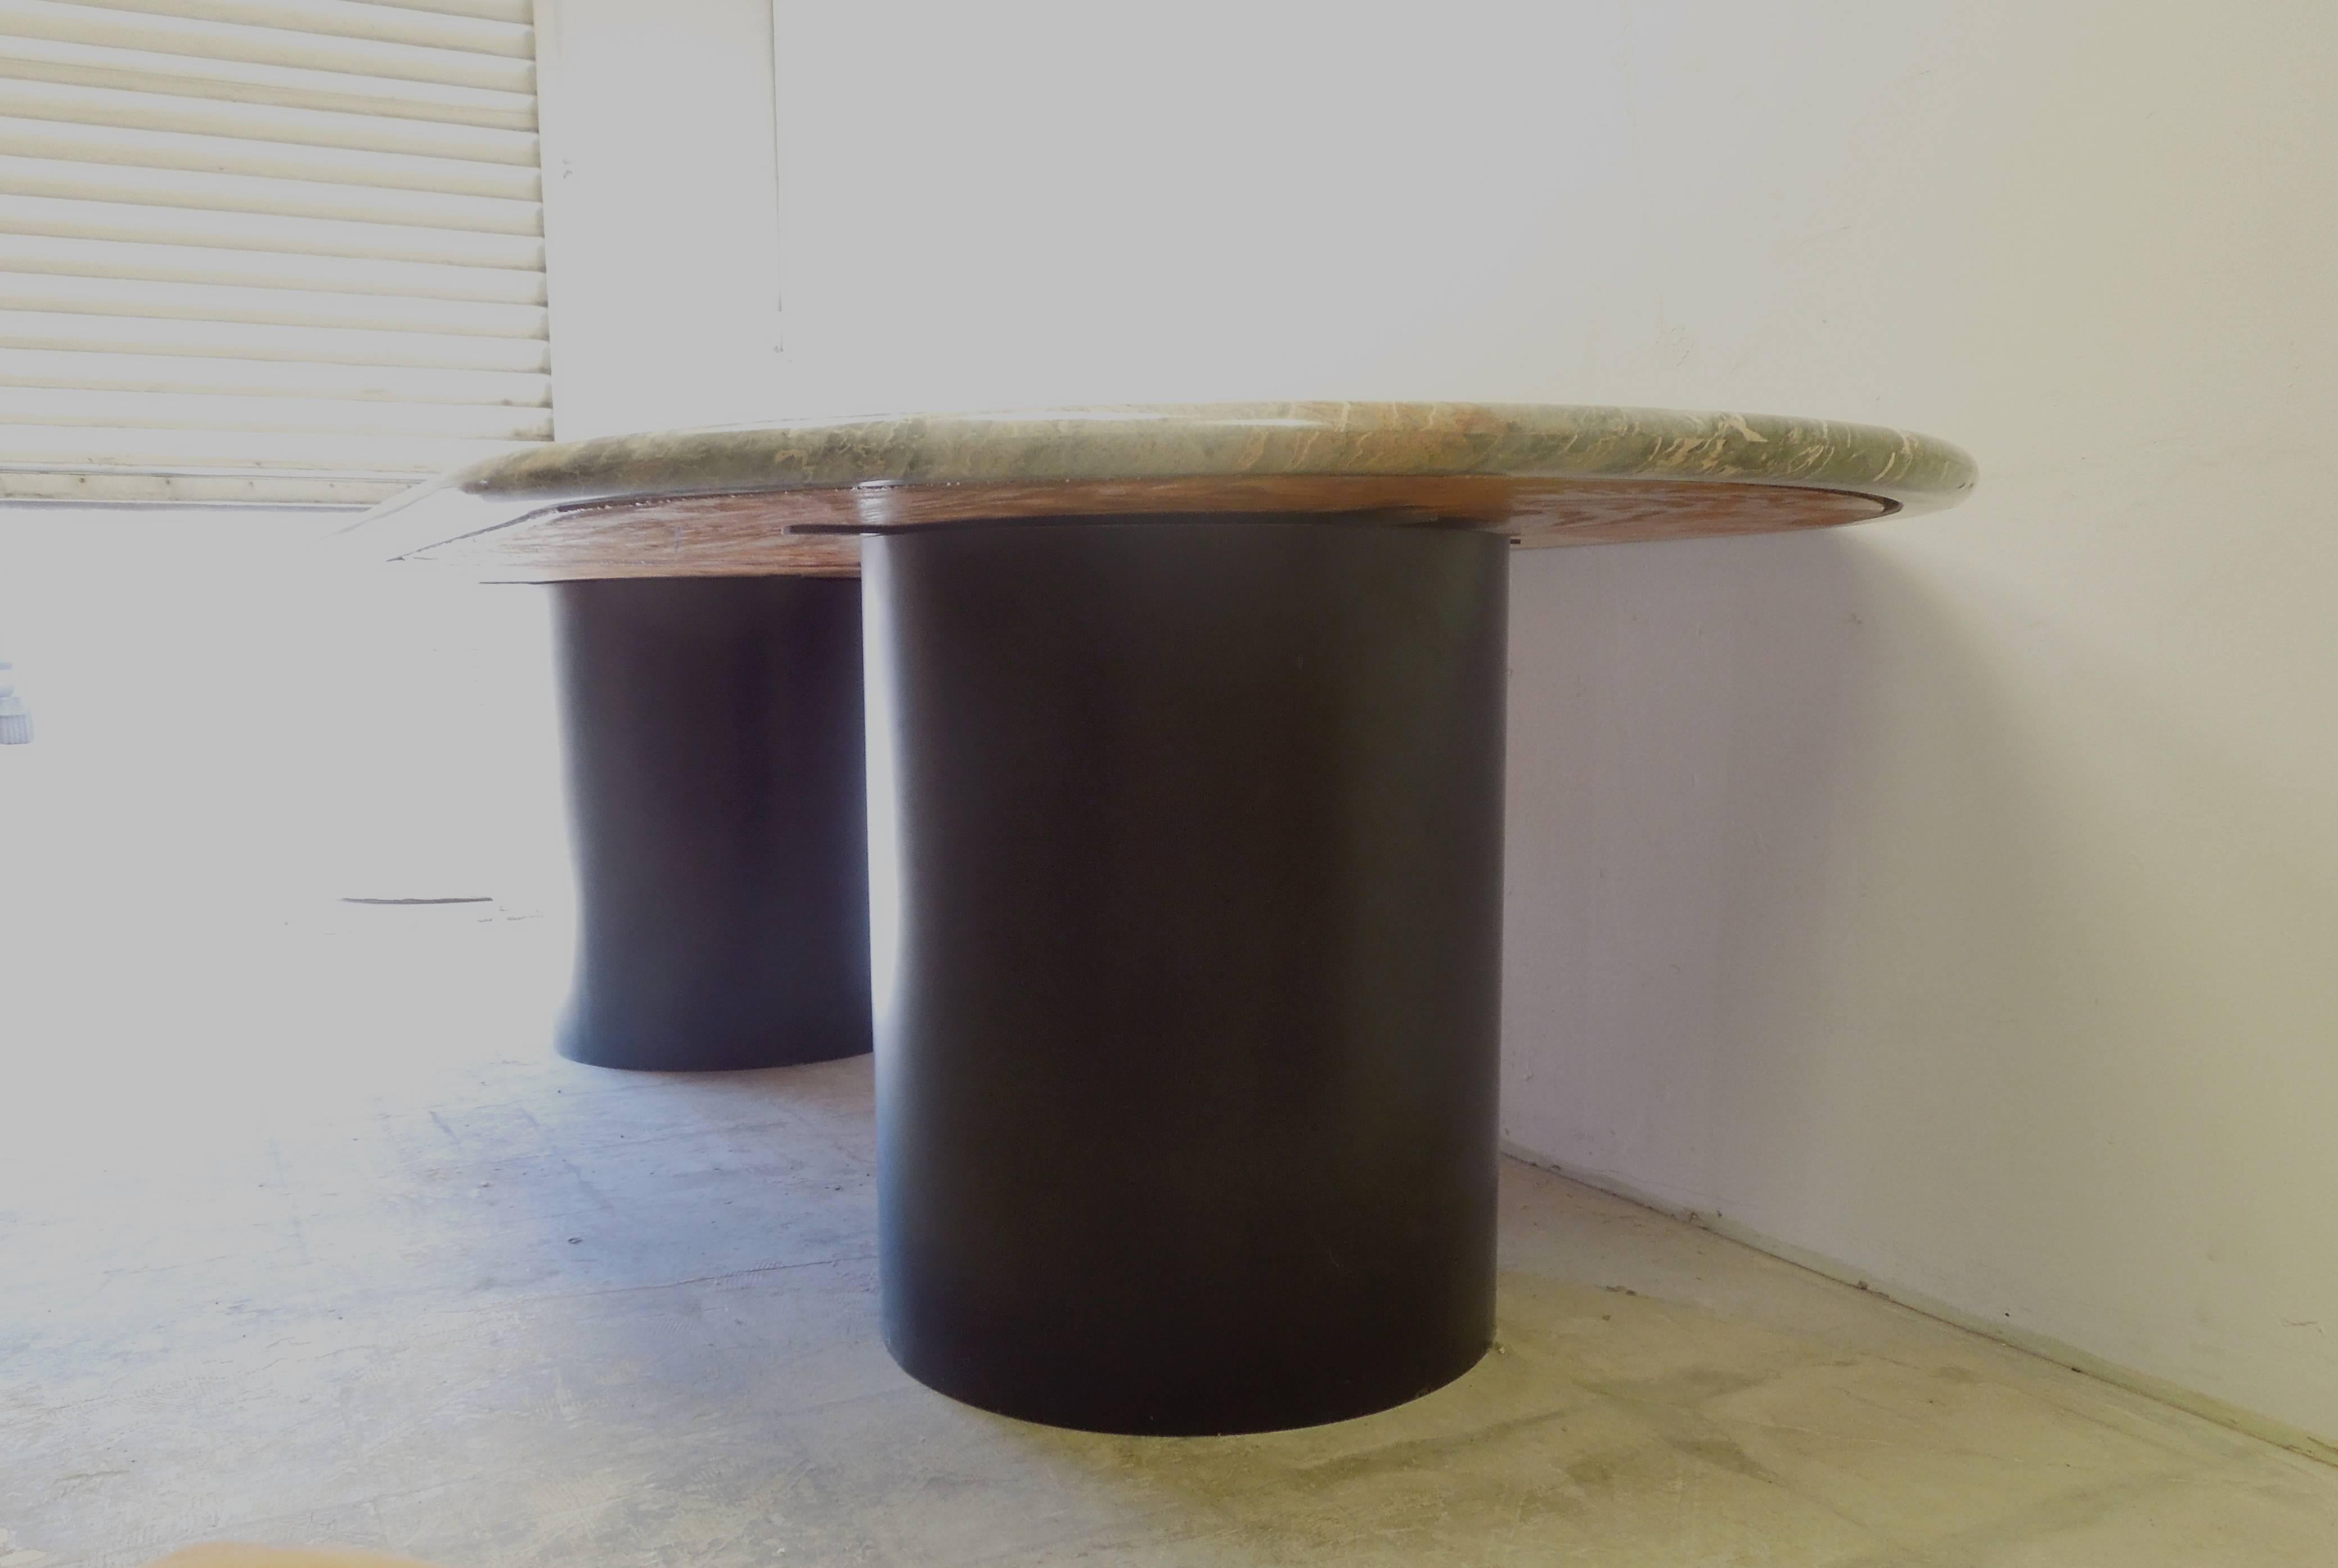 From a Hollywood Producer's Vintage Desert Estate, a custom made, racetrack shape dining table. The Italian marble table top in shades of grey, black, white and coral orange is from a 1960's massive one piece slab that is no longer available and